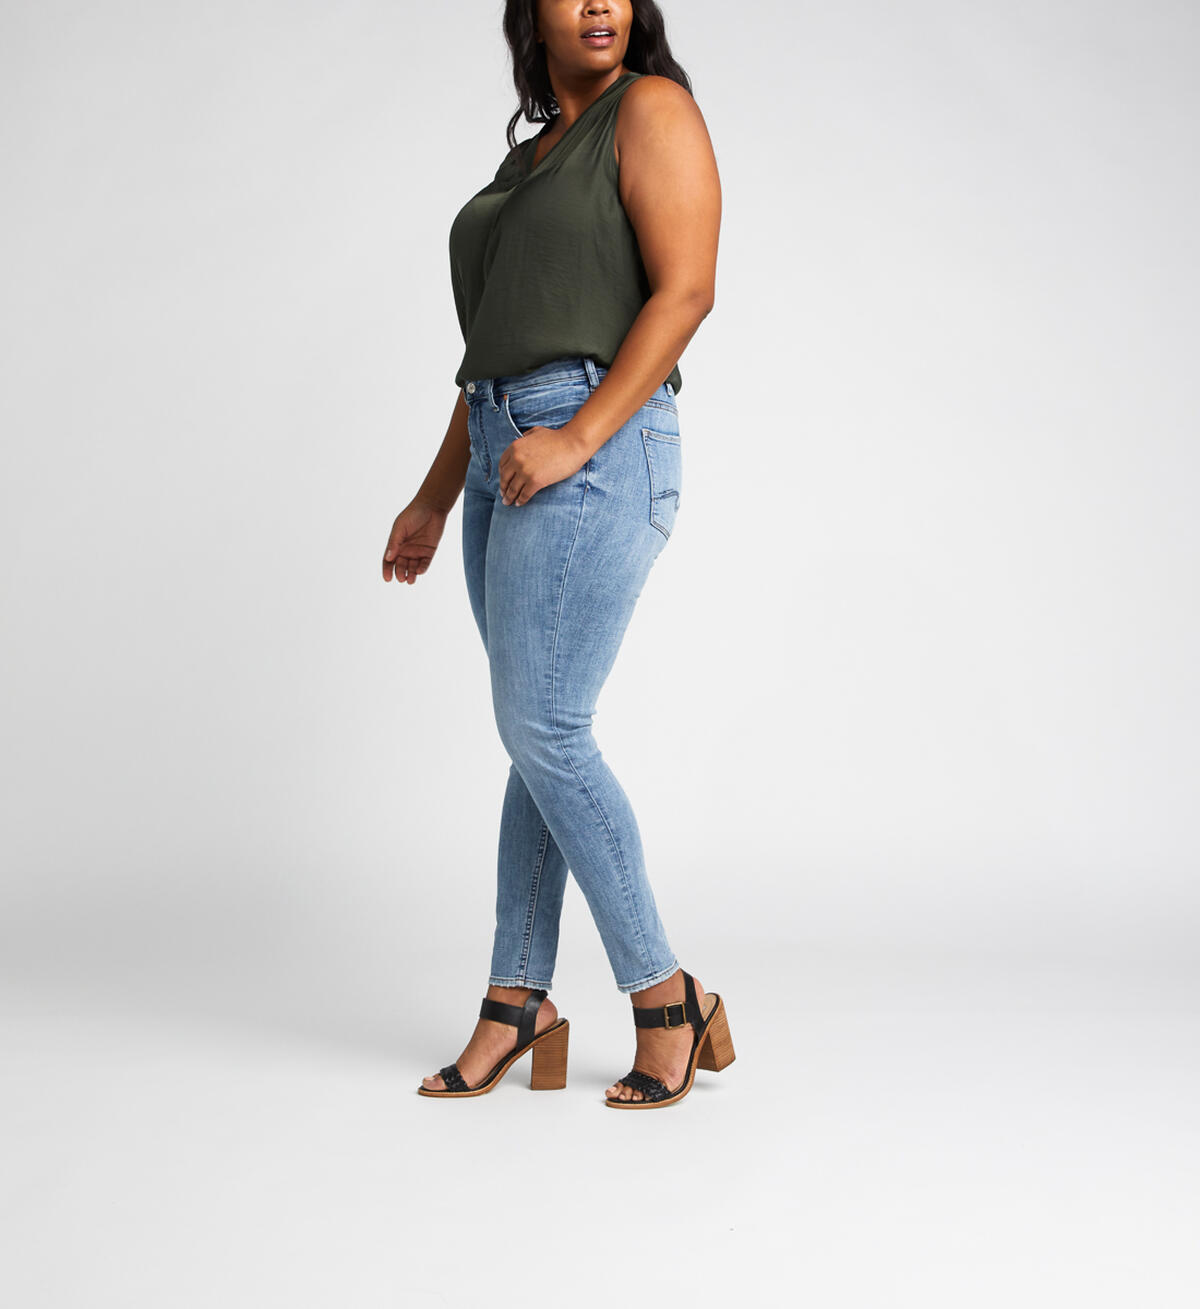 Avery High-Rise Curvy Skinny Jeans, , hi-res image number 2